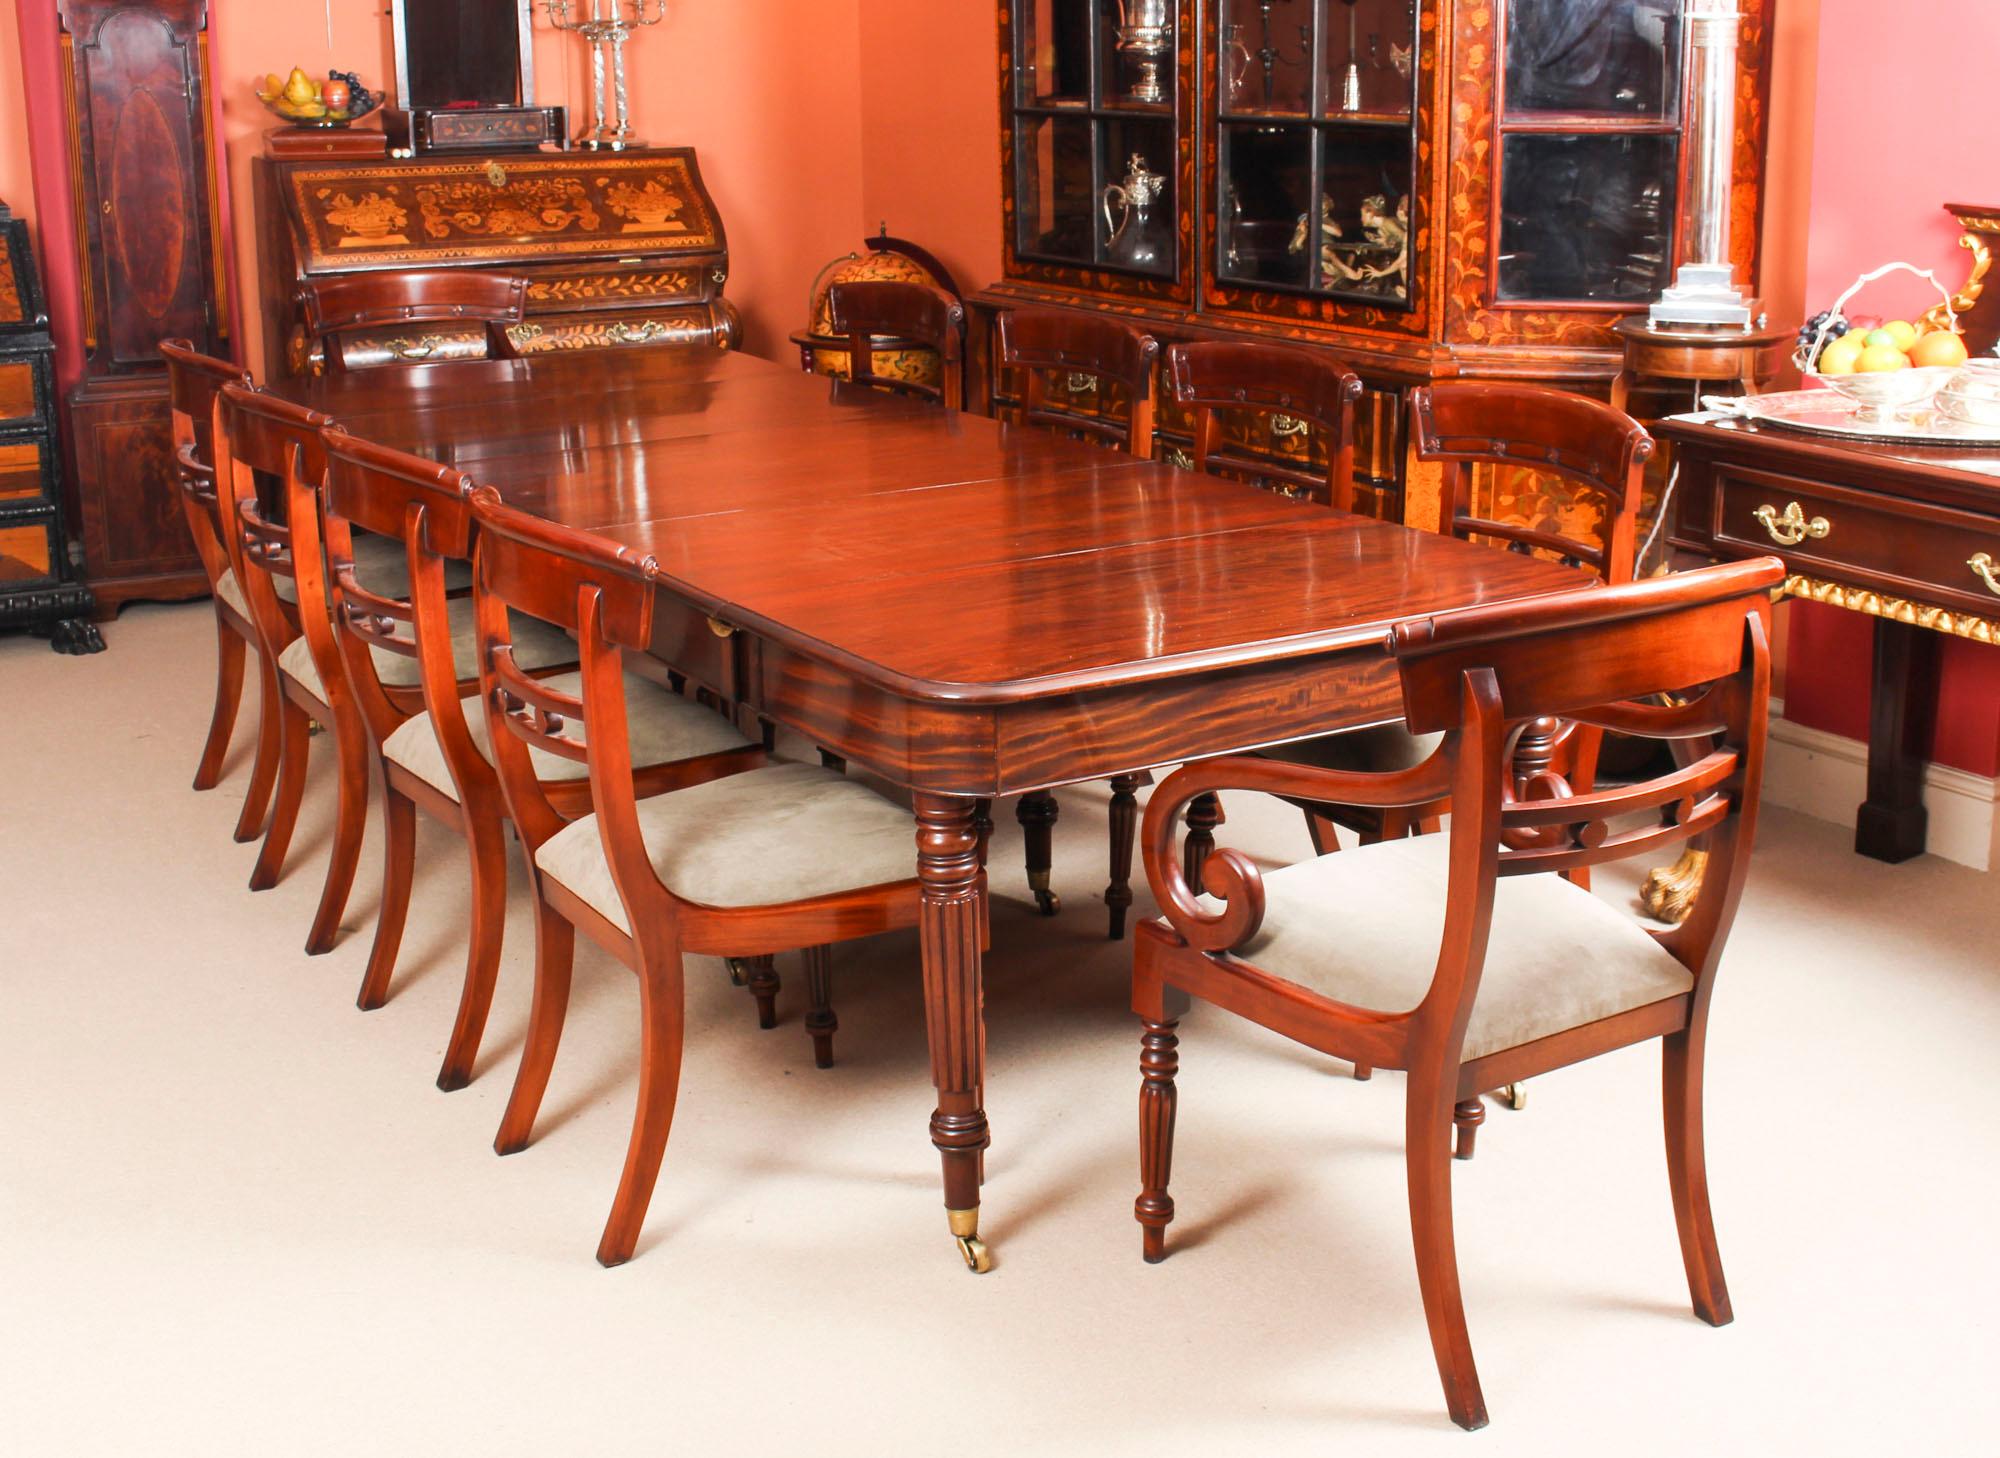 English Antique Regency Flame Mahogany Dining Table Manner of Gillows, 19th Century